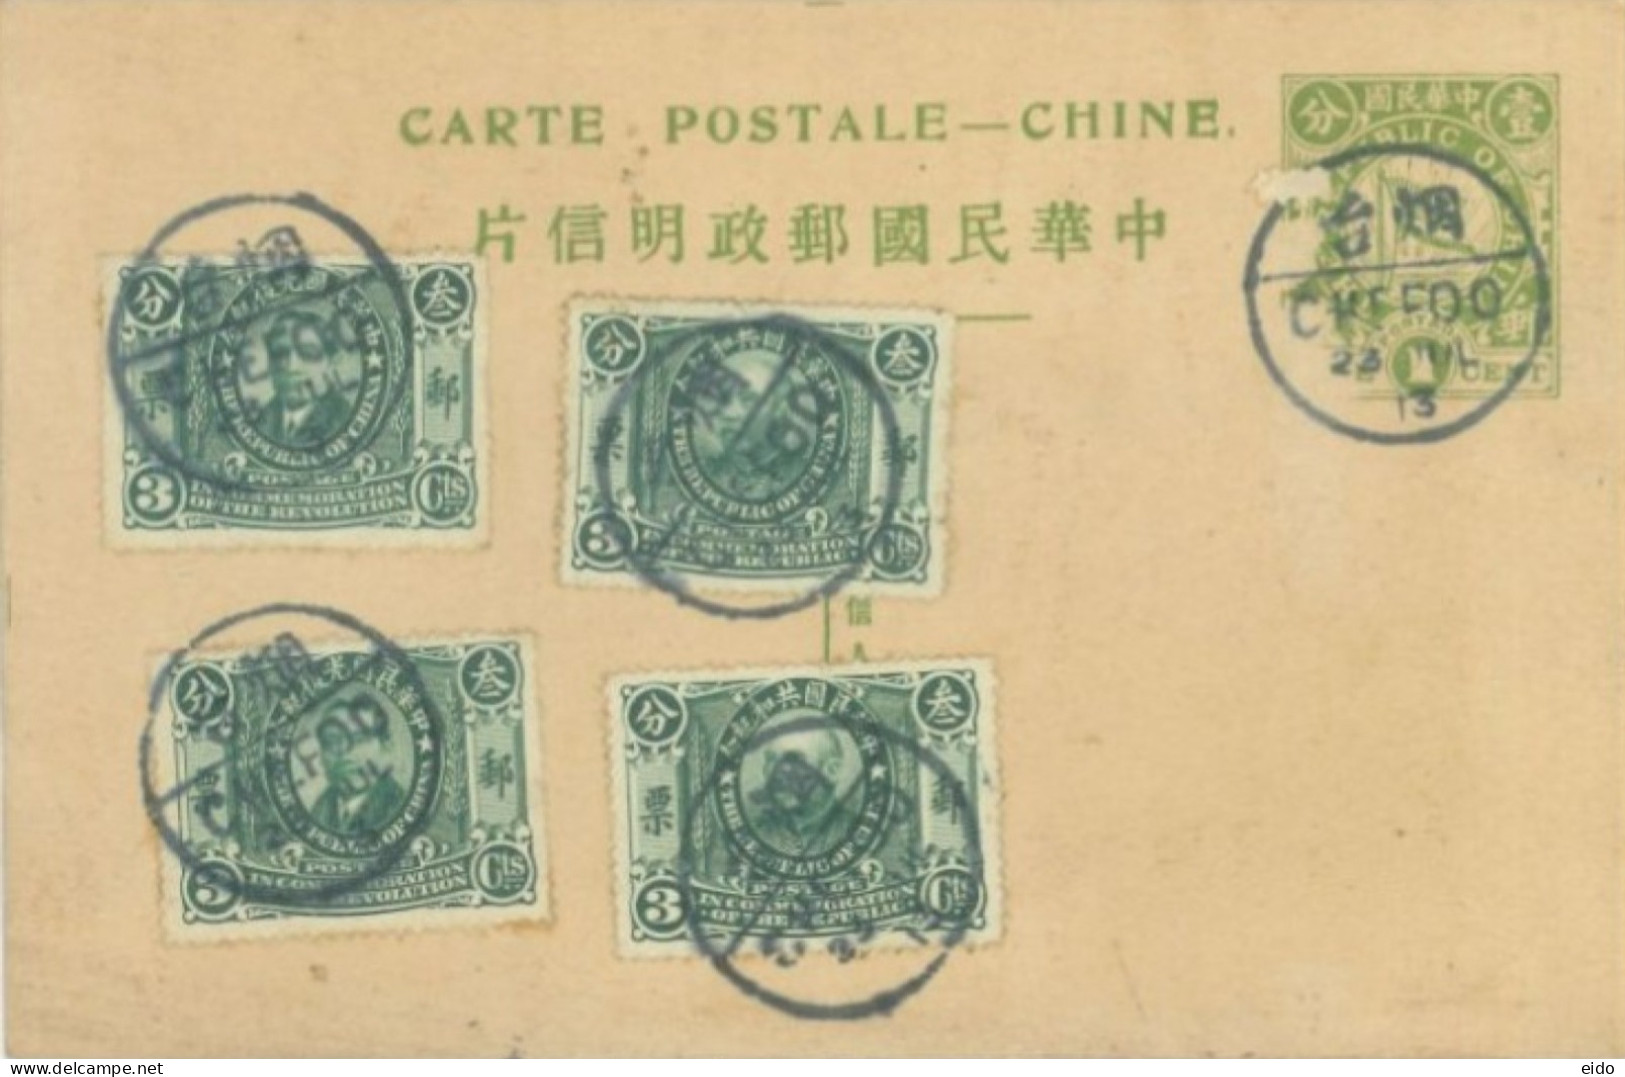 CHINA - 1913, STAMPS POSTCARD WITH CHEFOO POST FRANKING, RARE. - Covers & Documents